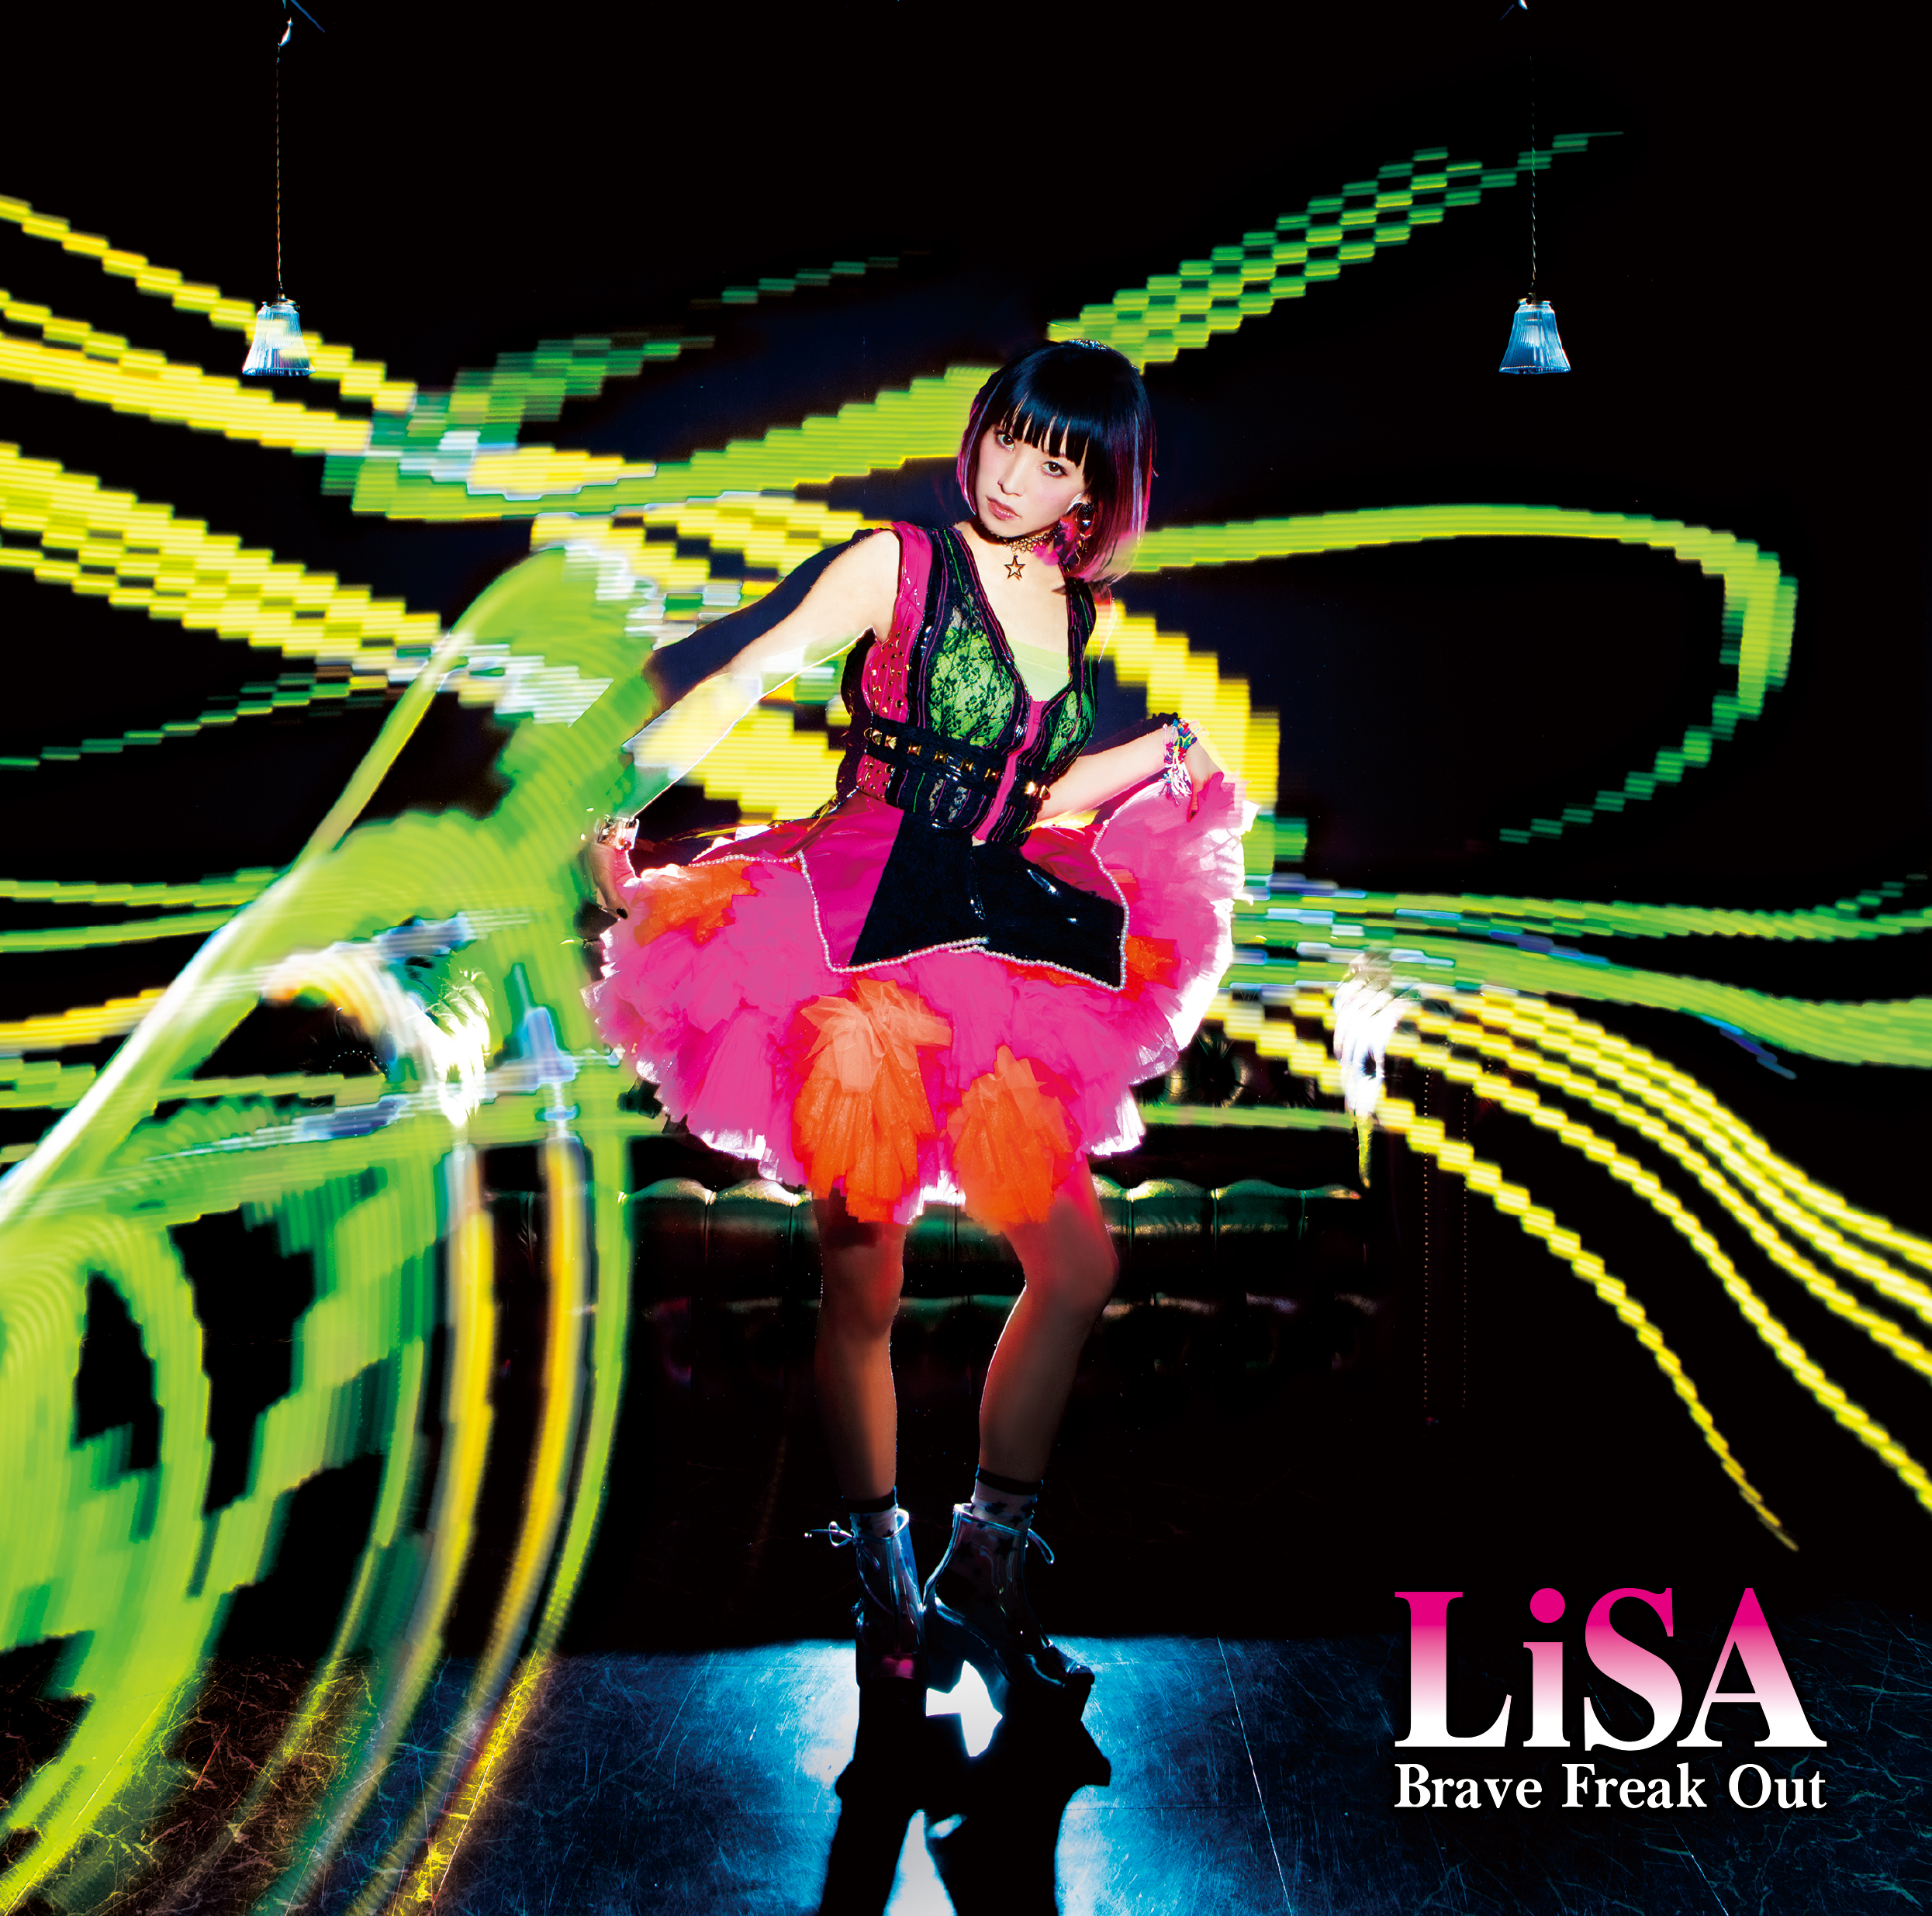 LiSA「Brave Freak Out(Special Edition)」レビュー - 画像一覧（2/2）